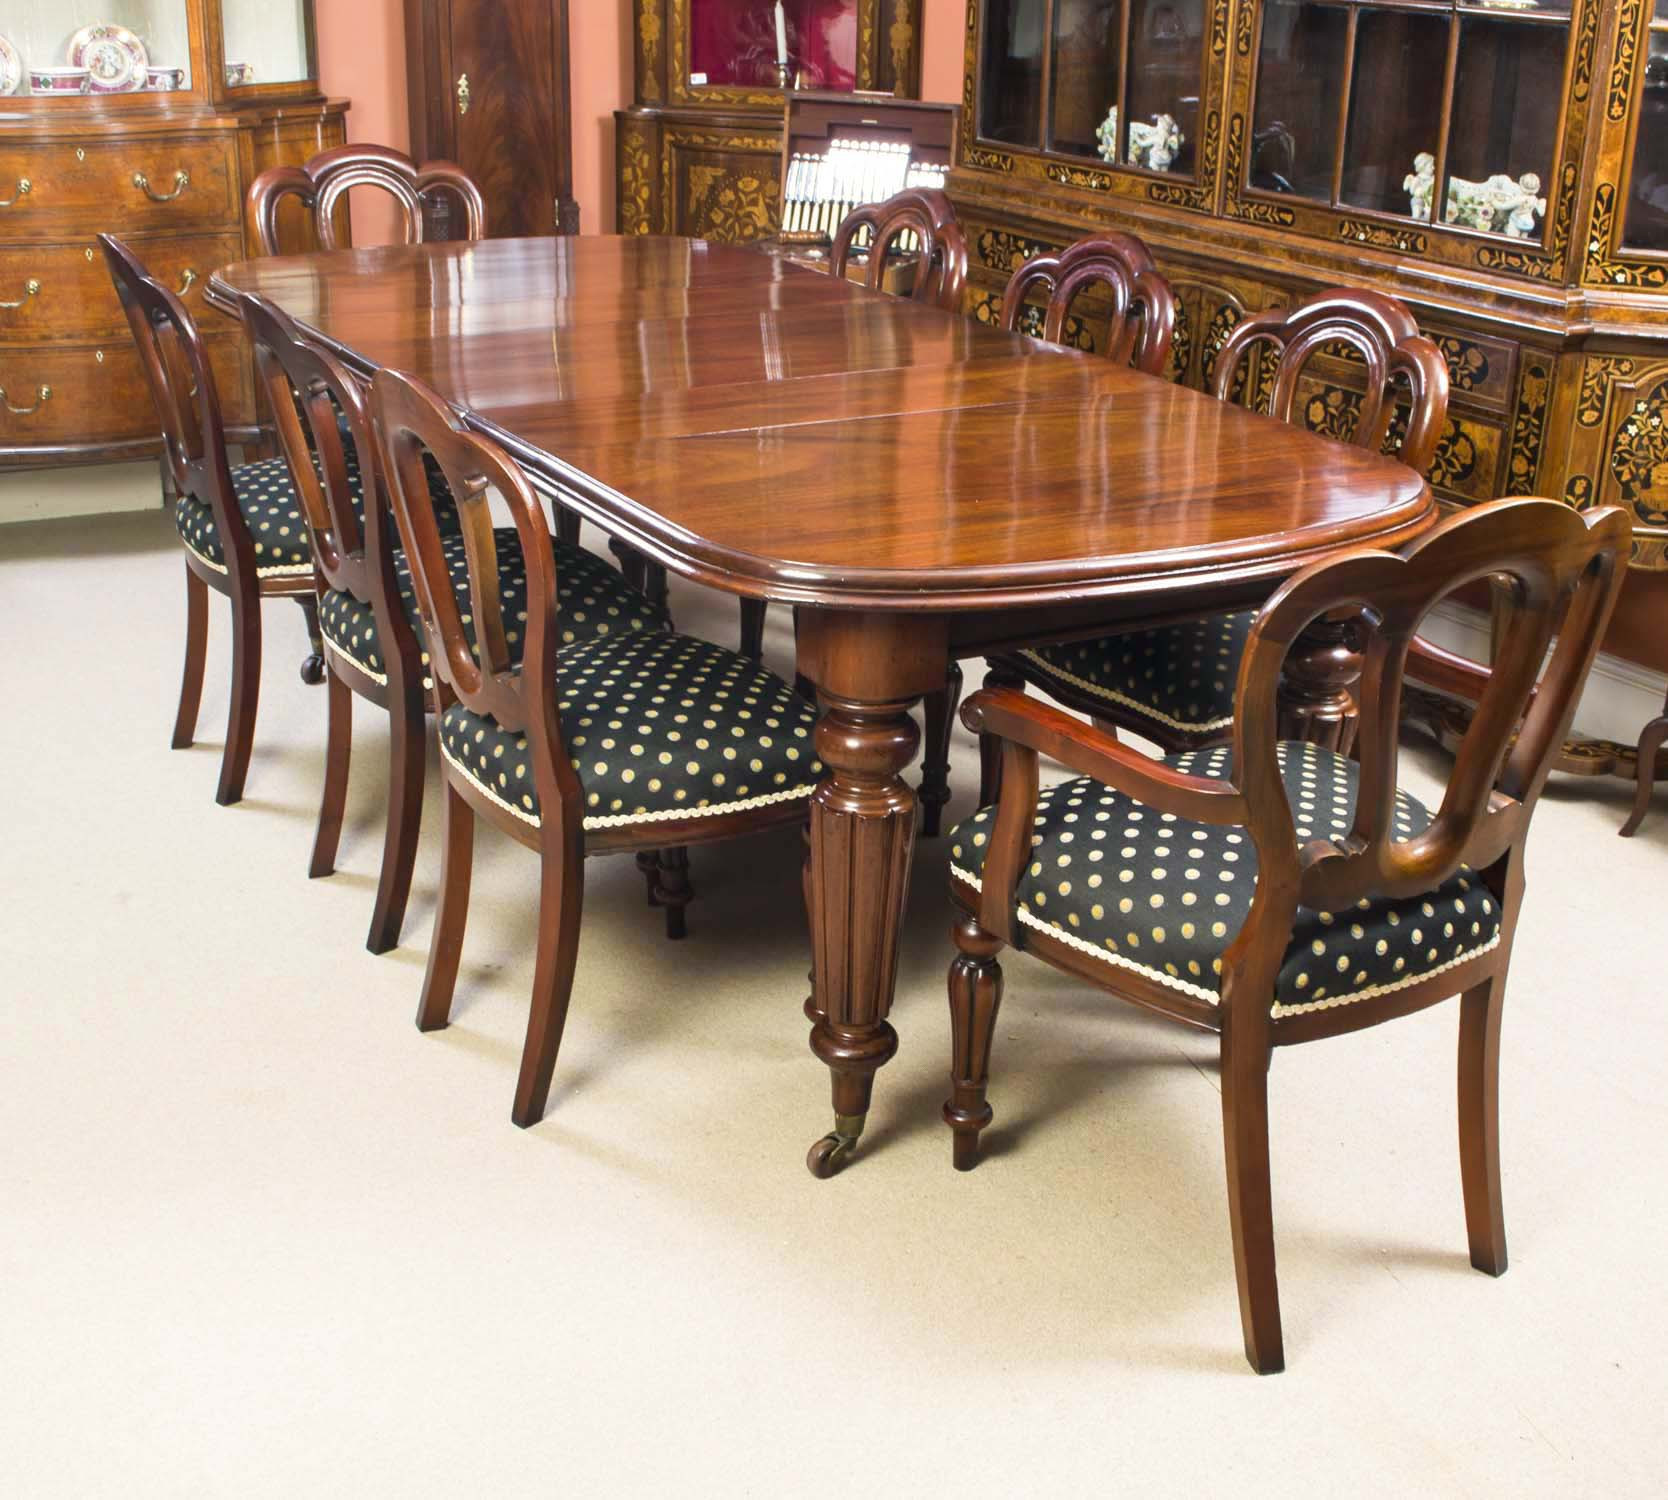 8 Chair Dinner Table
 Antique Victorian Mahogany Dining Table 8 Chairs c1870